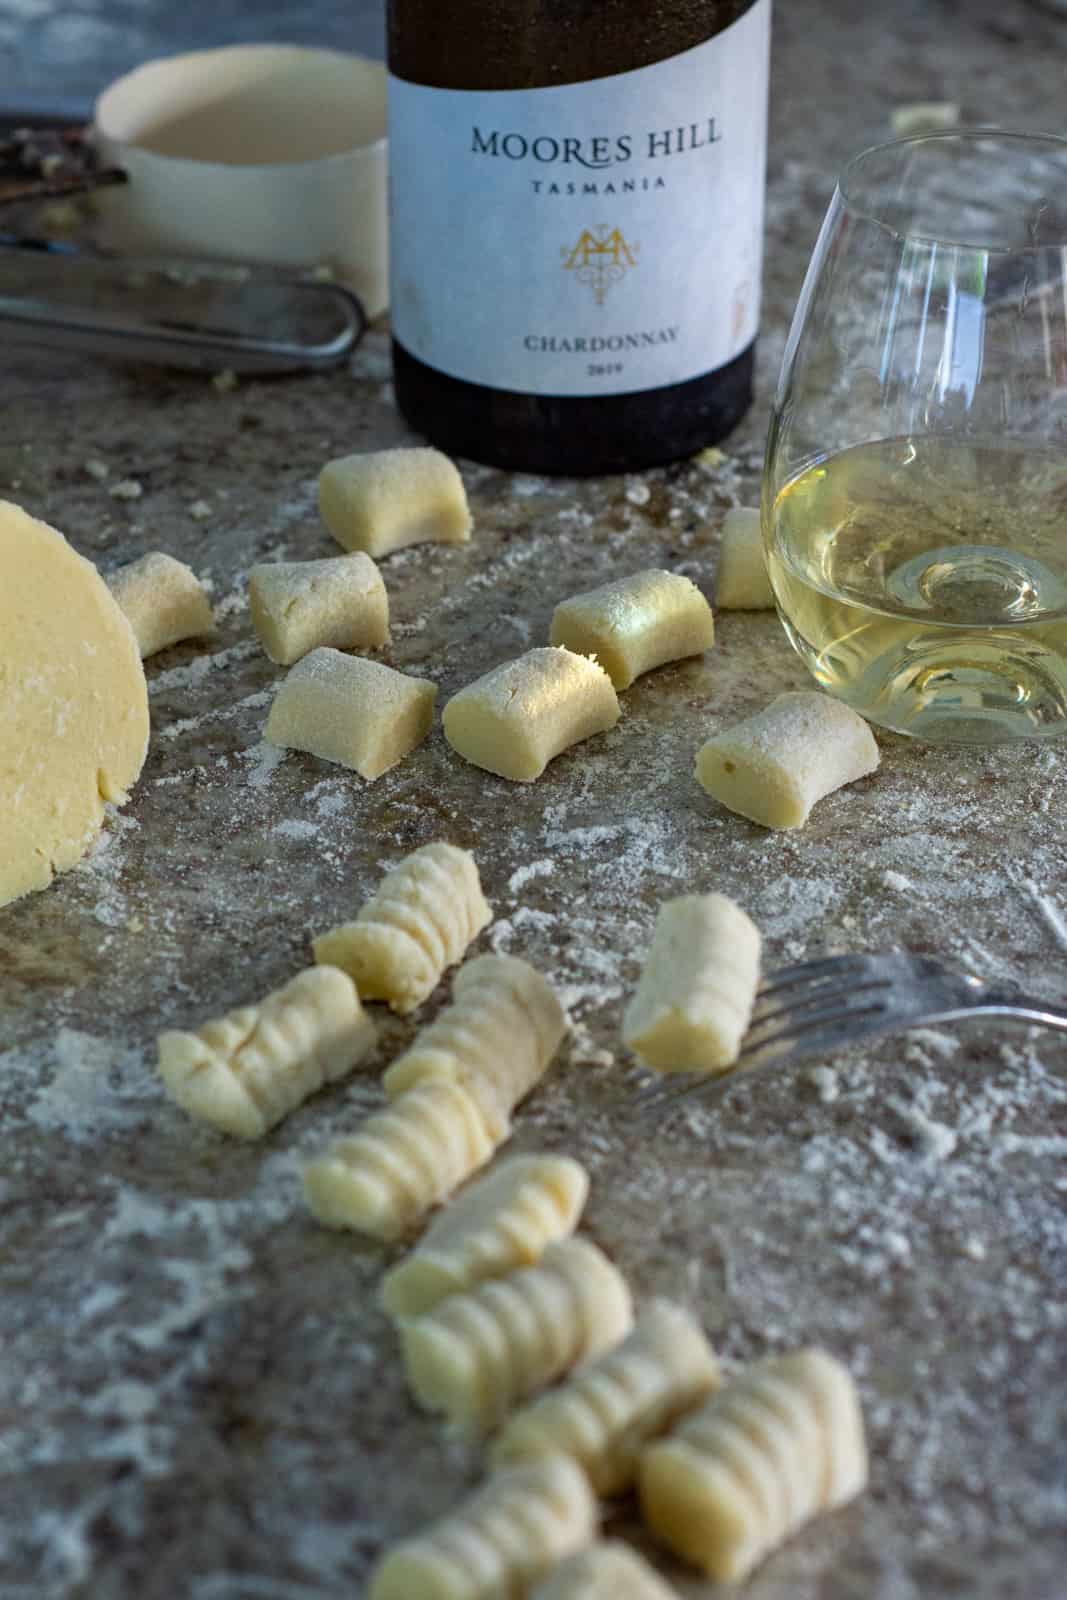 gnocchi being rolled over a fork and moores hill chardonnay